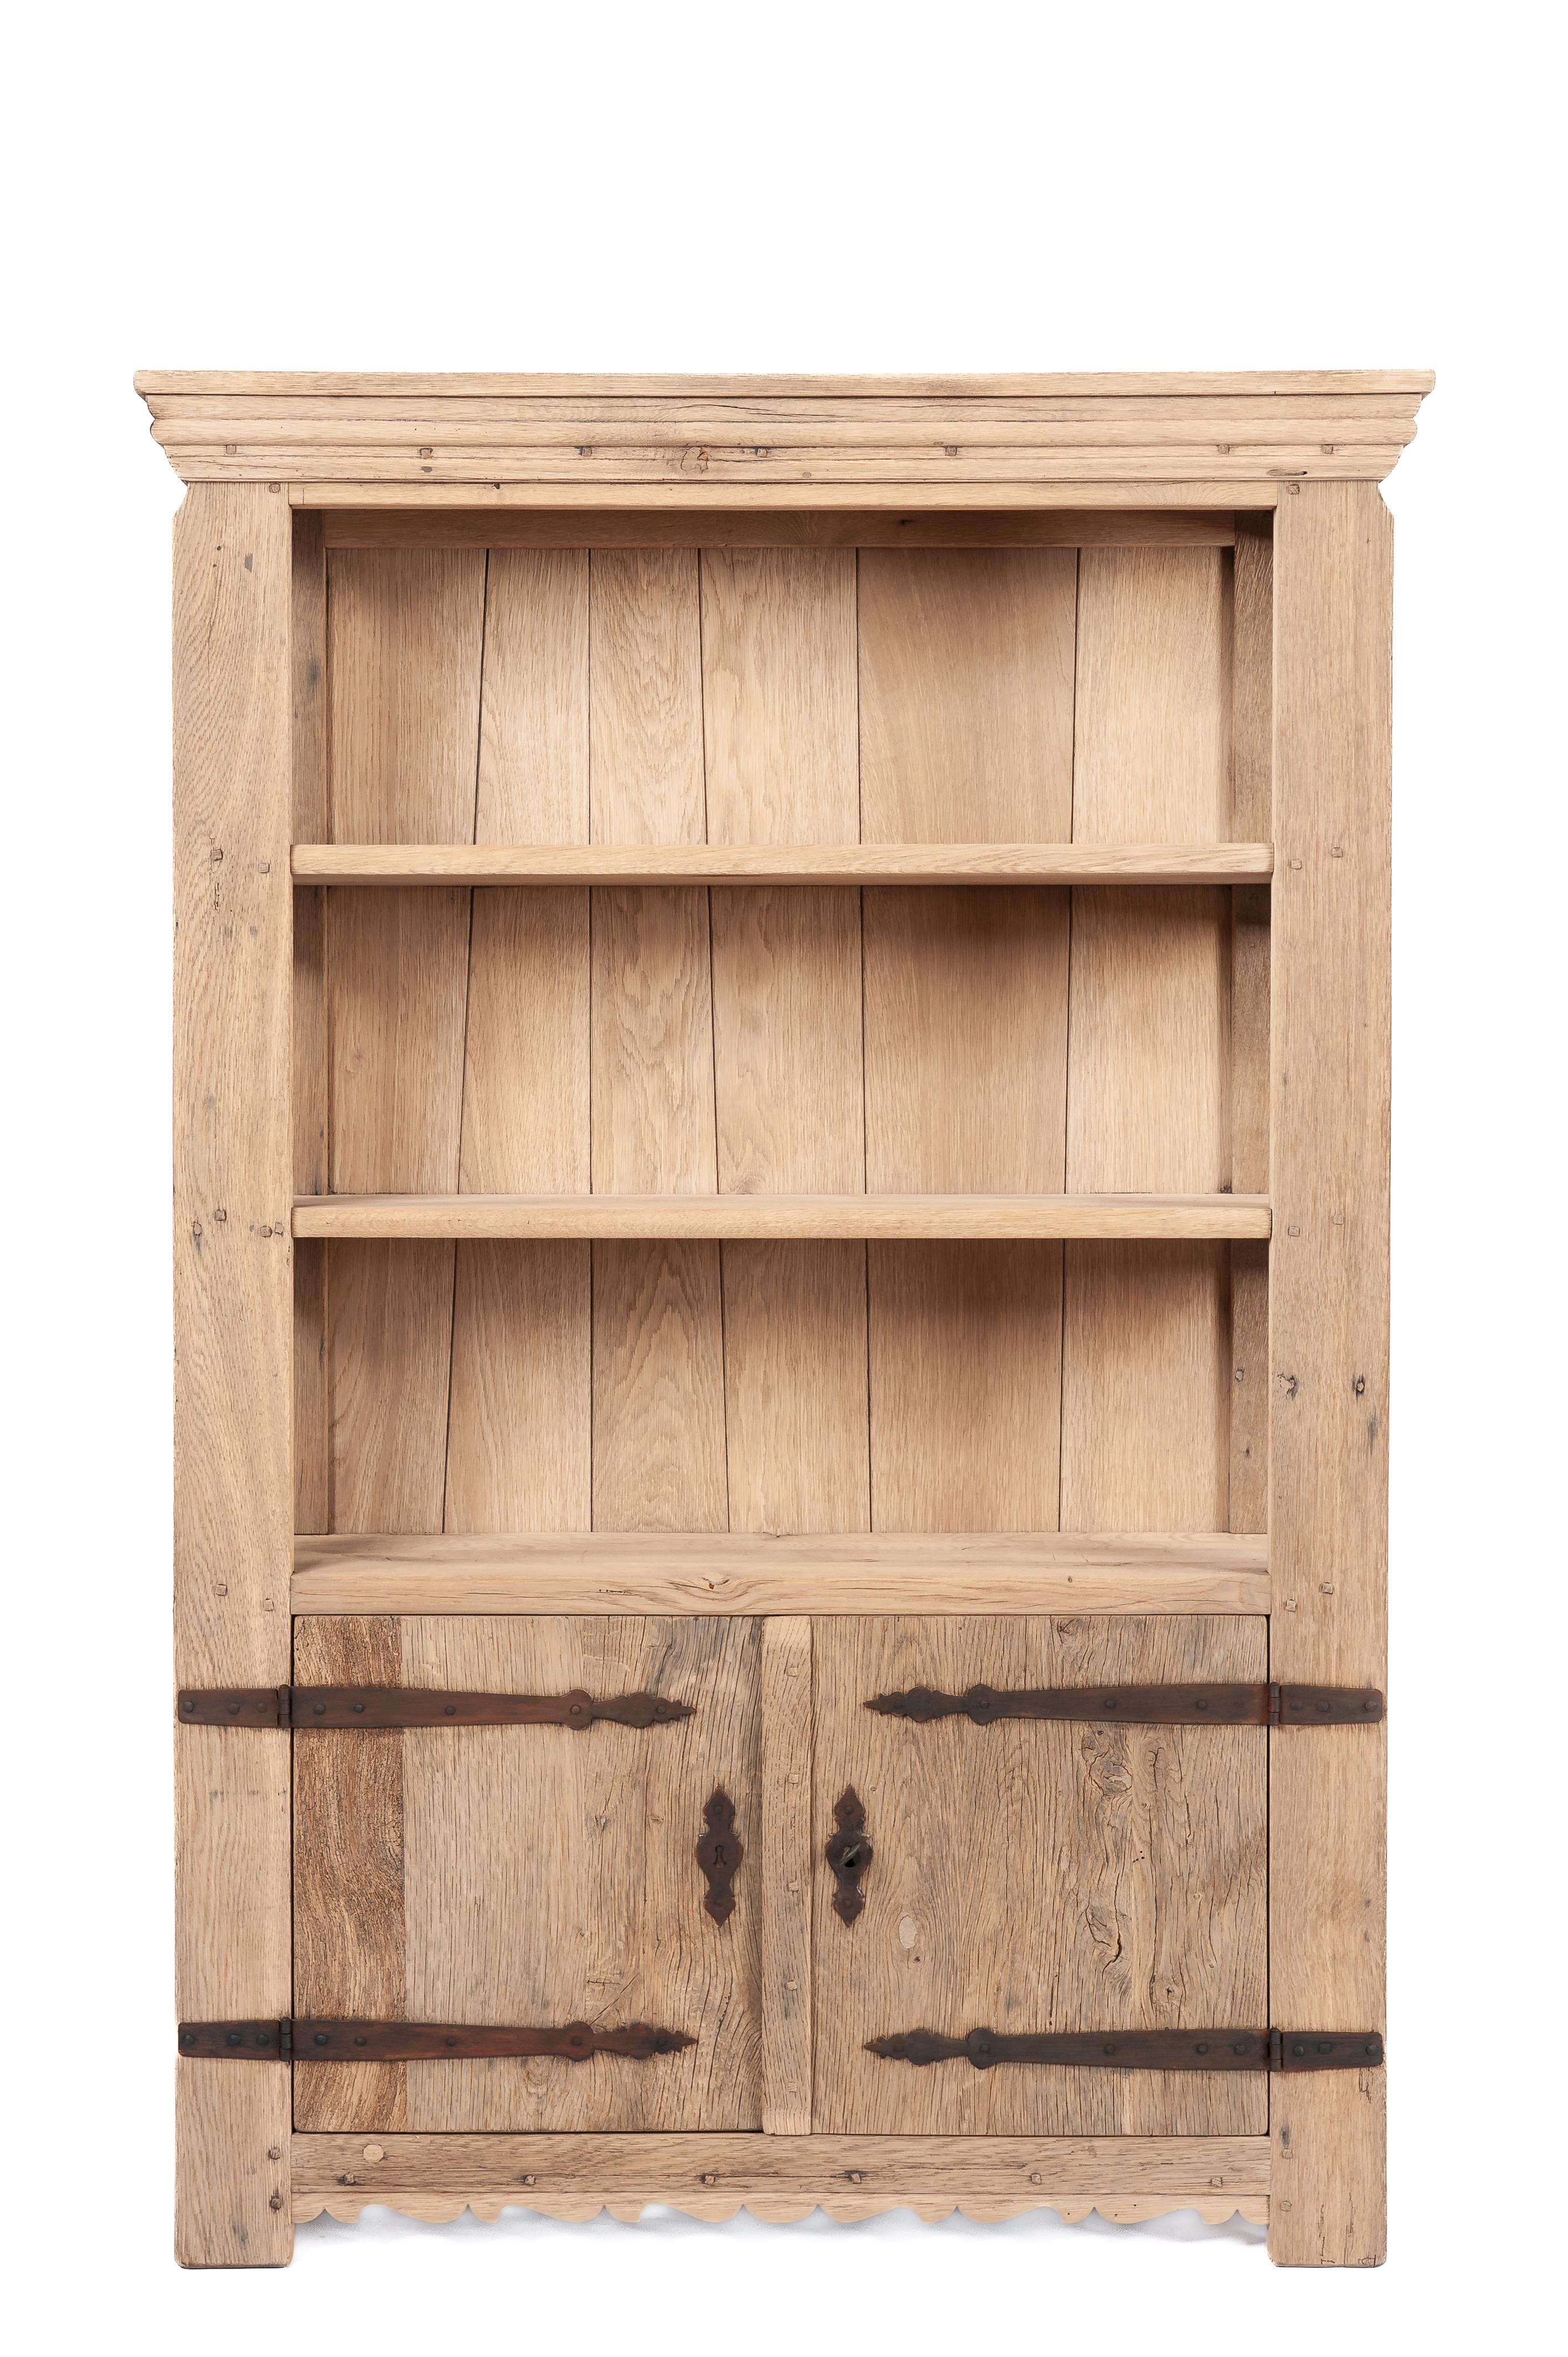 On offer here is a timeless two-door oak cupboard, meticulously crafted from reclaimed oak wood dating back to the 1960s. This unique piece was built by the esteemed Piet Rombouts & Sons furniture workshop, a legacy proudly continued by our family.